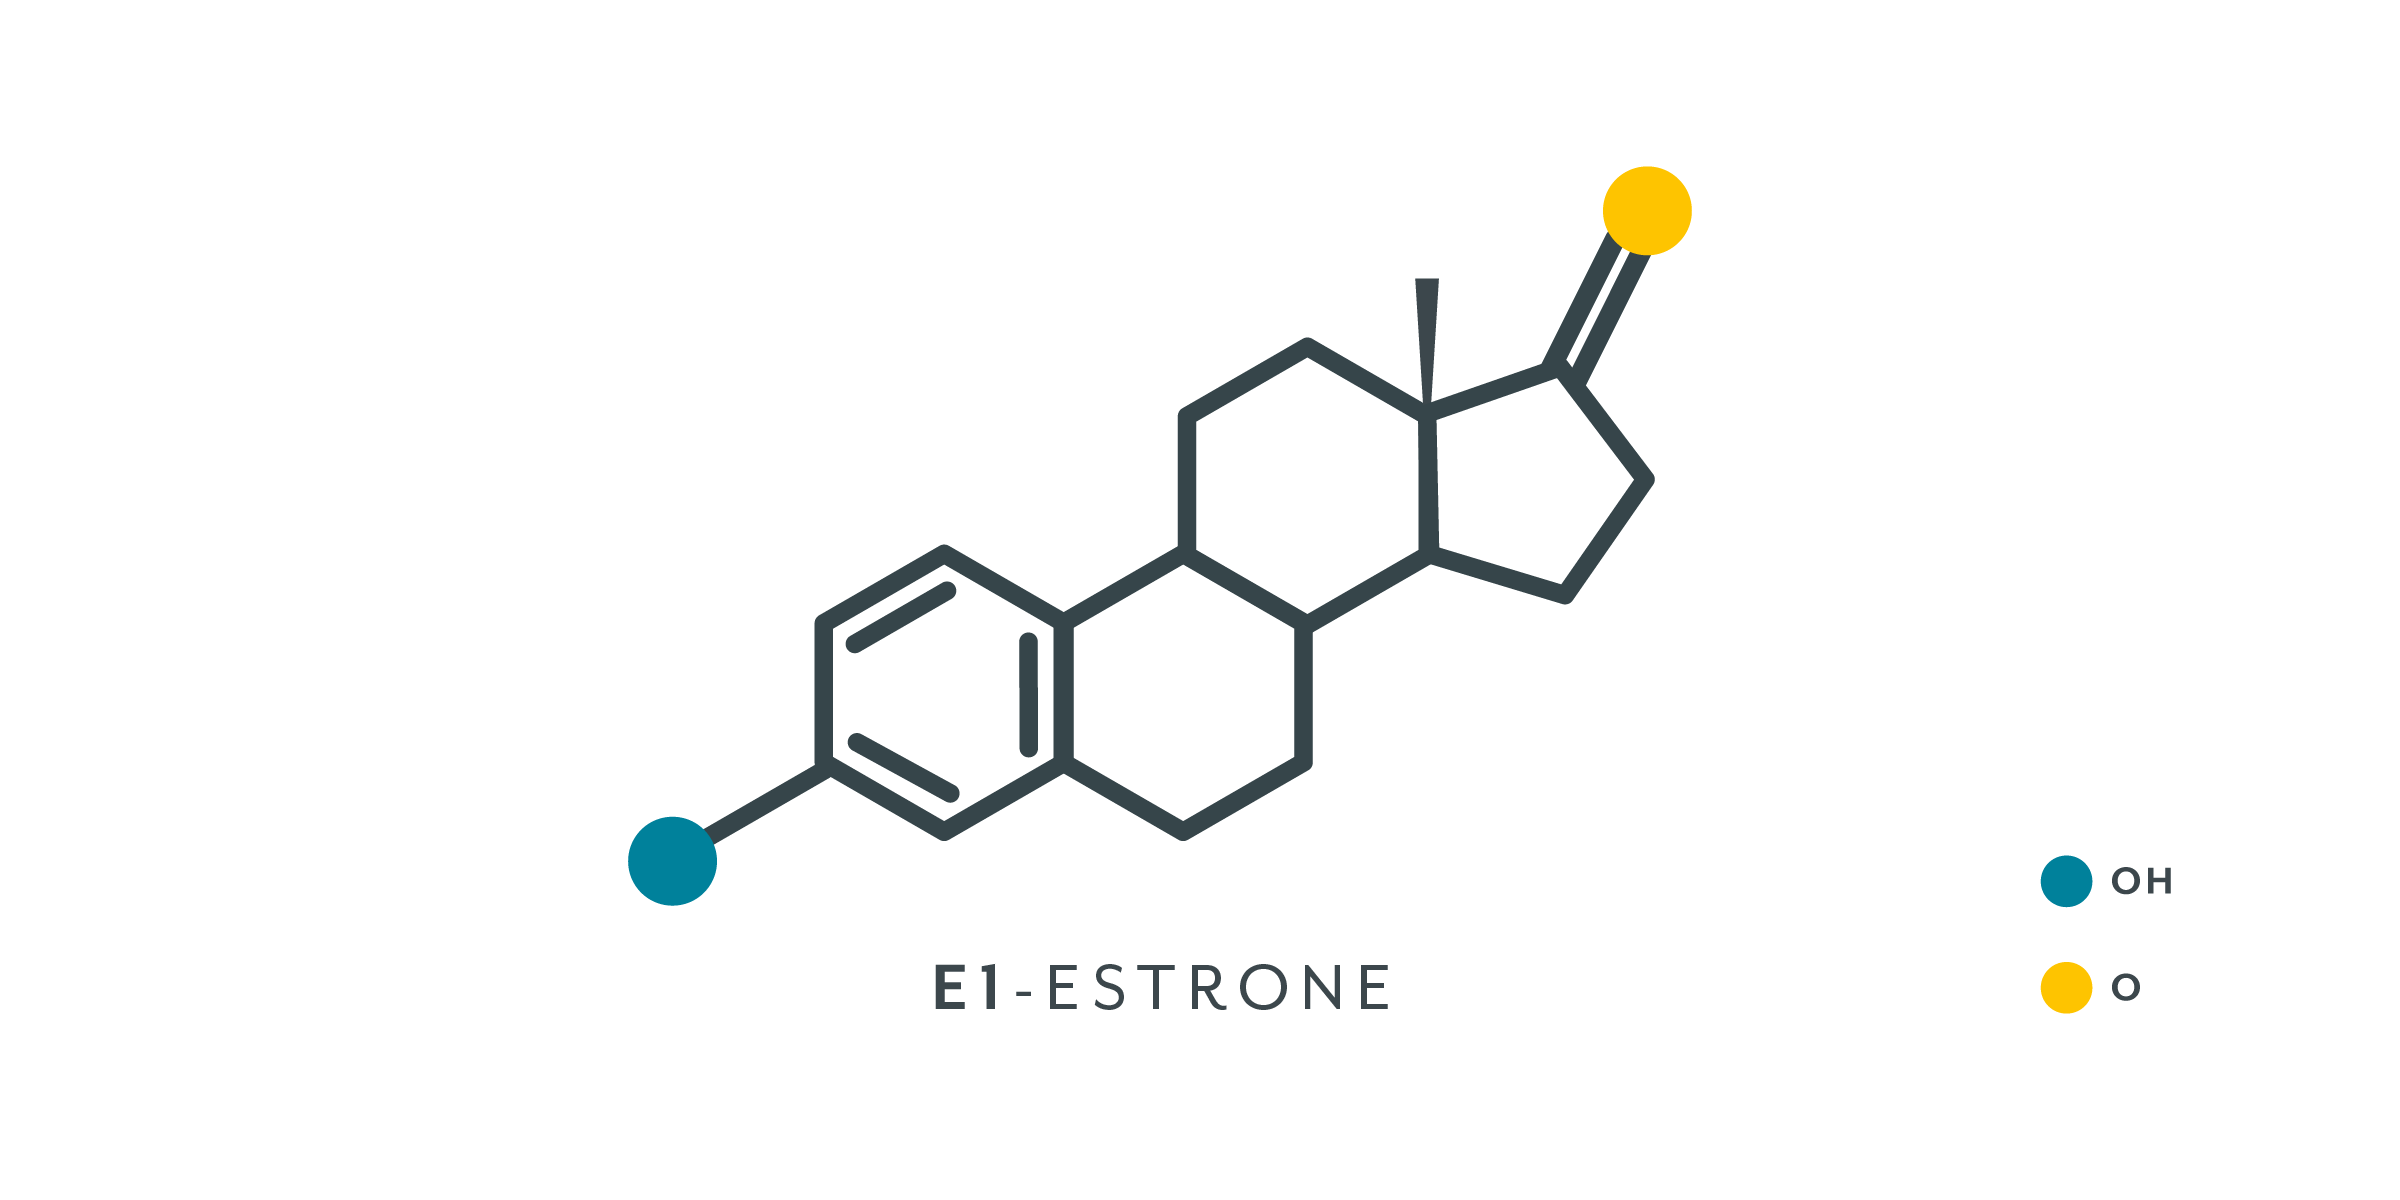 Chemical structure of different forms of estrogen in the body.